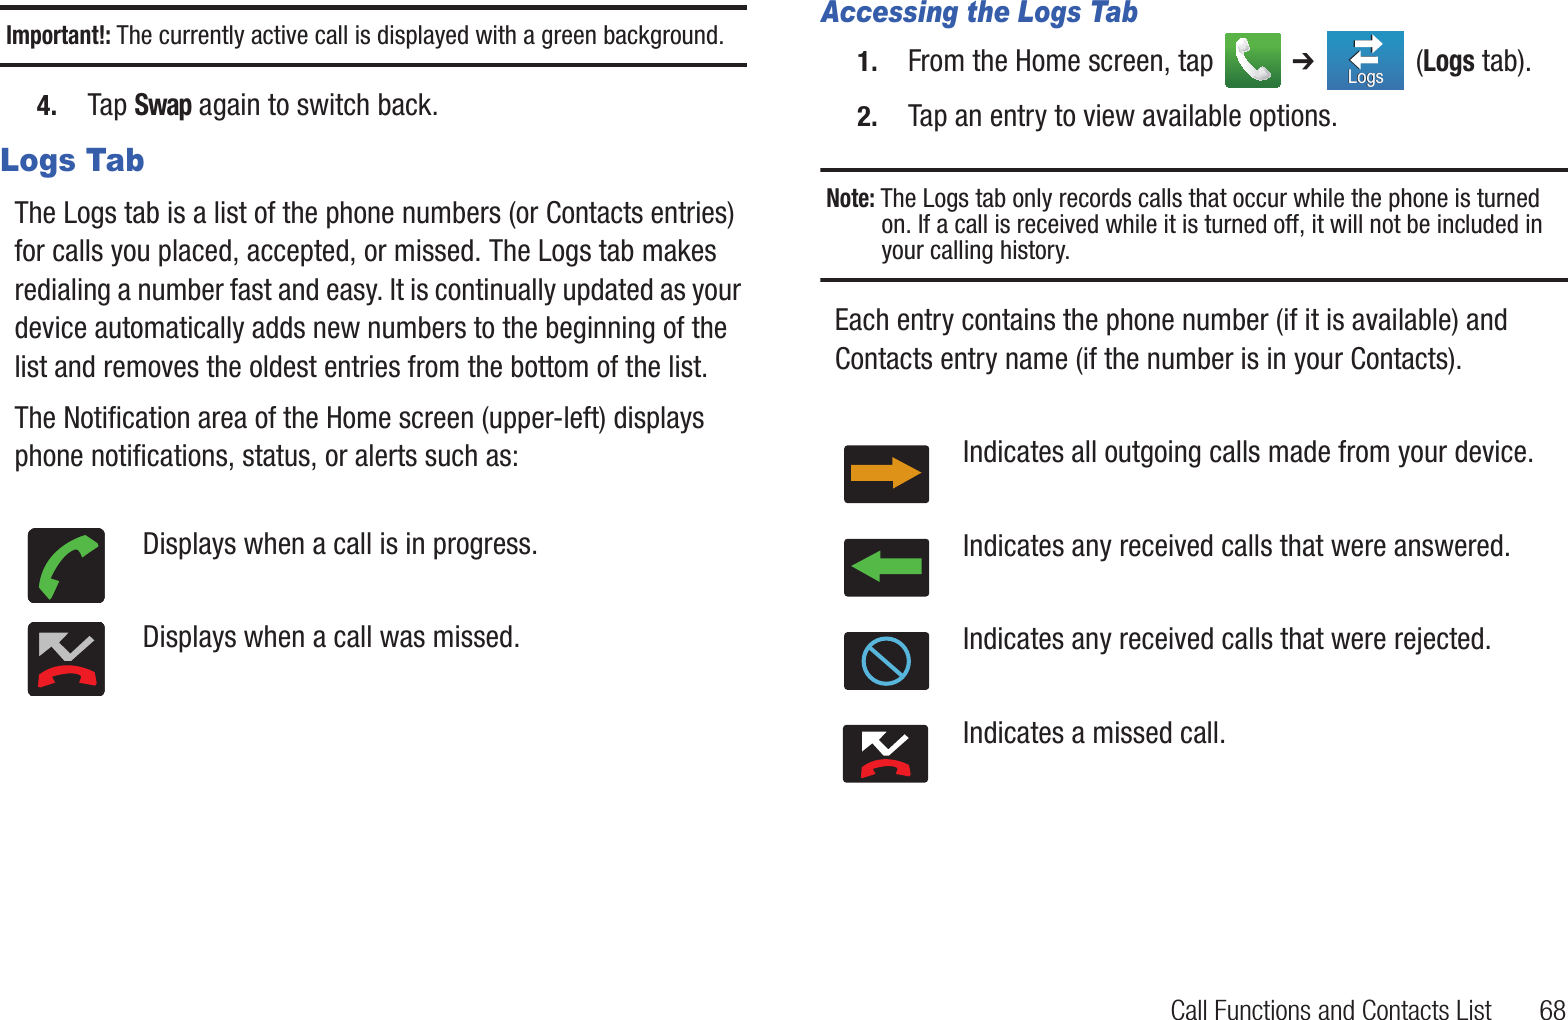 Call Functions and Contacts List       68Important!: The currently active call is displayed with a green background.4. Tap Swap again to switch back.Logs TabThe Logs tab is a list of the phone numbers (or Contacts entries) for calls you placed, accepted, or missed. The Logs tab makes redialing a number fast and easy. It is continually updated as your device automatically adds new numbers to the beginning of the list and removes the oldest entries from the bottom of the list. The Notification area of the Home screen (upper-left) displays phone notifications, status, or alerts such as:  Accessing the Logs Tab1. From the Home screen, tap   ➔  (Logs tab).2. Tap an entry to view available options.Note: The Logs tab only records calls that occur while the phone is turned on. If a call is received while it is turned off, it will not be included in your calling history.Each entry contains the phone number (if it is available) and Contacts entry name (if the number is in your Contacts).  Displays when a call is in progress.Displays when a call was missed.Indicates all outgoing calls made from your device.Indicates any received calls that were answered.Indicates any received calls that were rejected.Indicates a missed call.LogsLogs